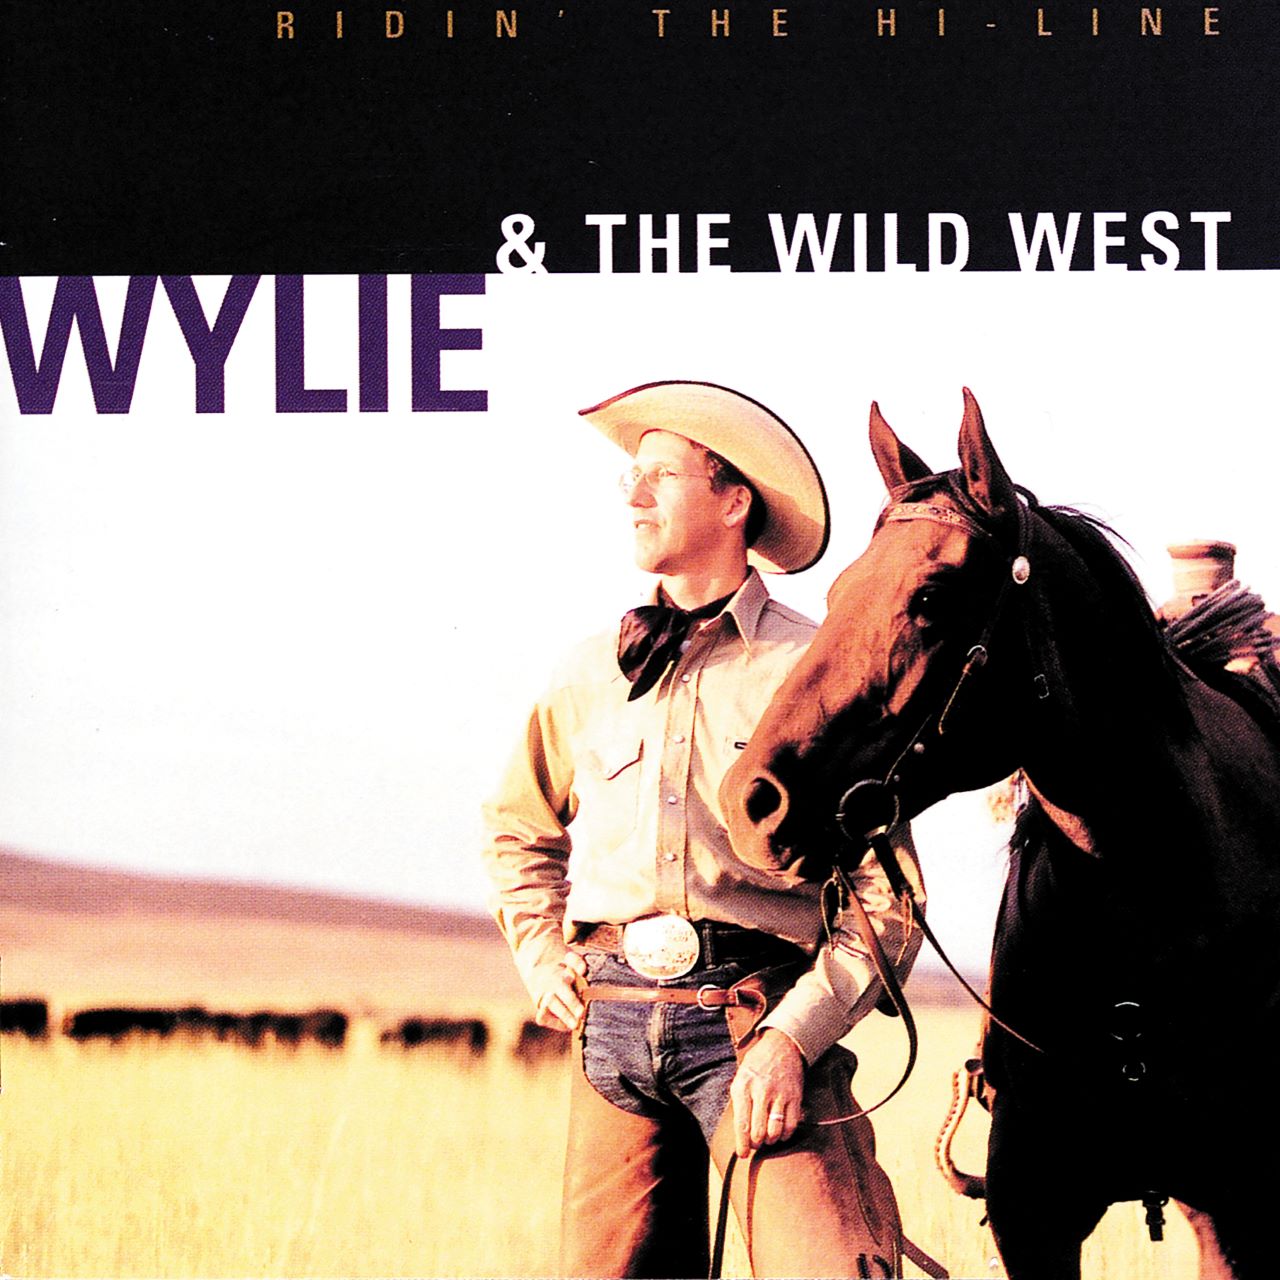 Wylie & The Wild West - Ridin’ The Hi-Line cover album